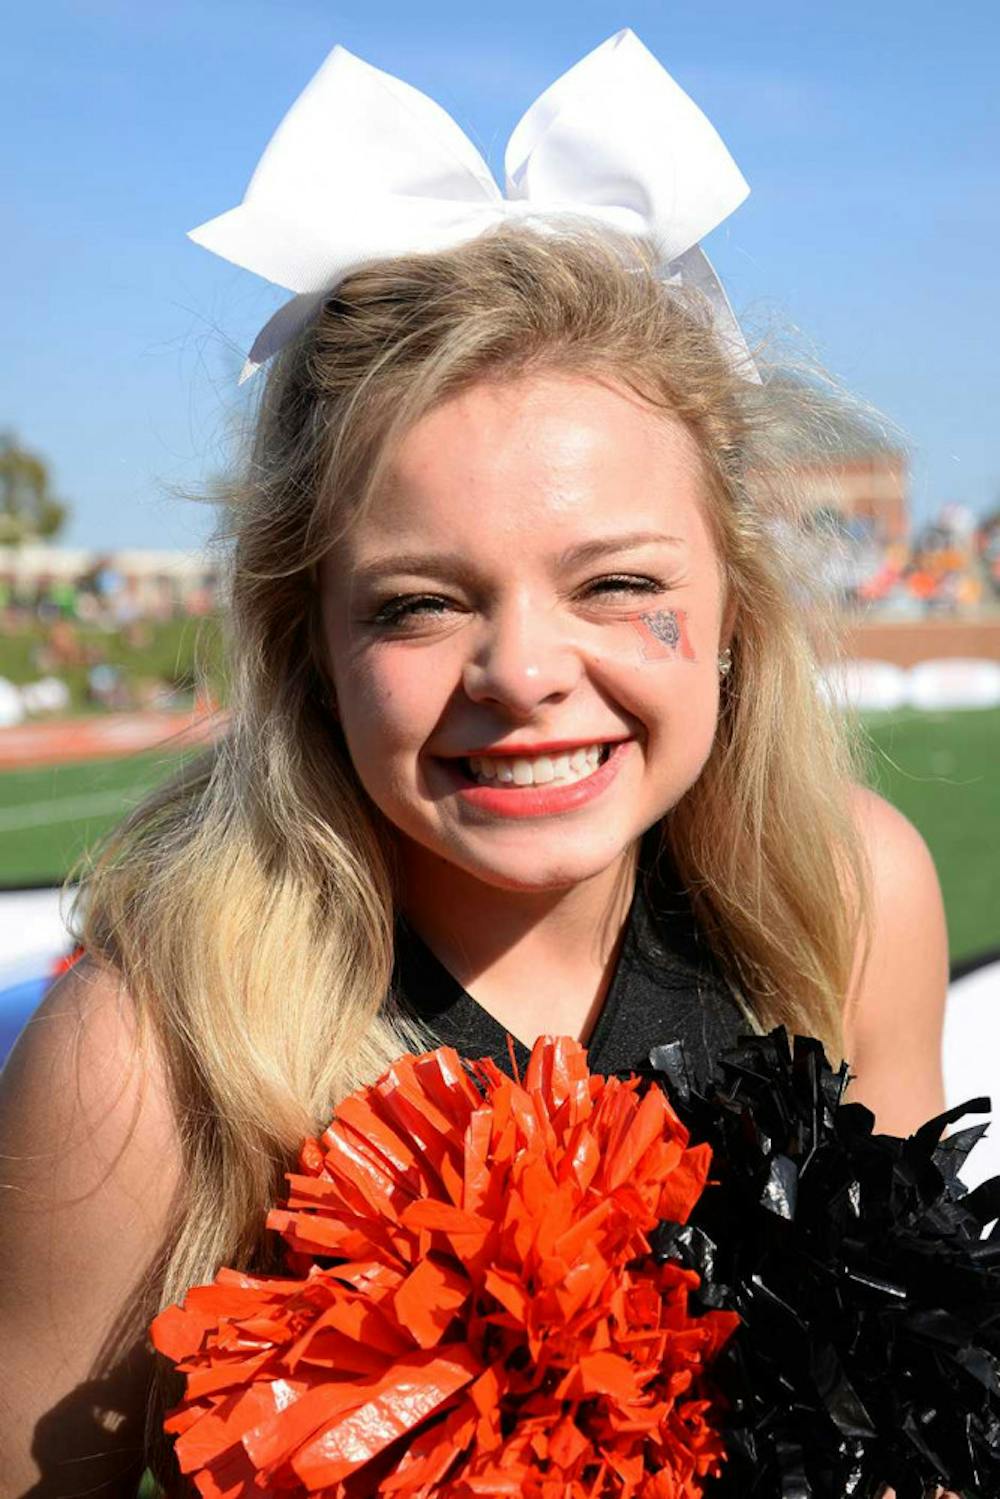 Darby Rich is a senior on the cheerleading squad who is sad about leaving, but she says she looks forward to seeing what type of impact she leaves behind.